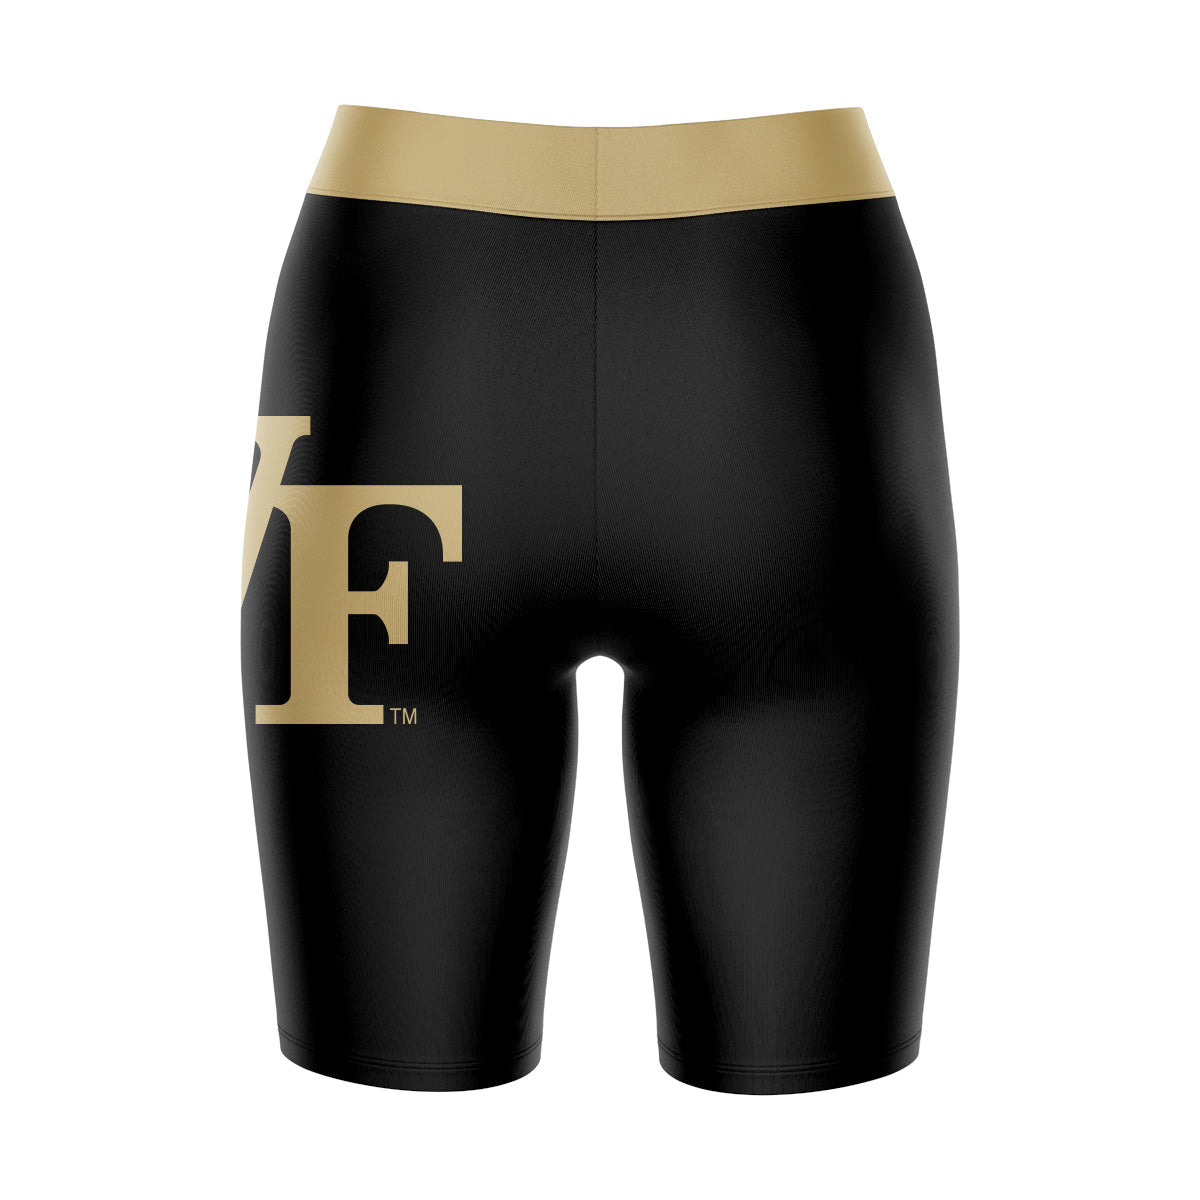 WF Demon Deacons Vive La Fete Game Day Logo on Thigh and Waistband Black and Gold Women Bike Short 9 Inseam